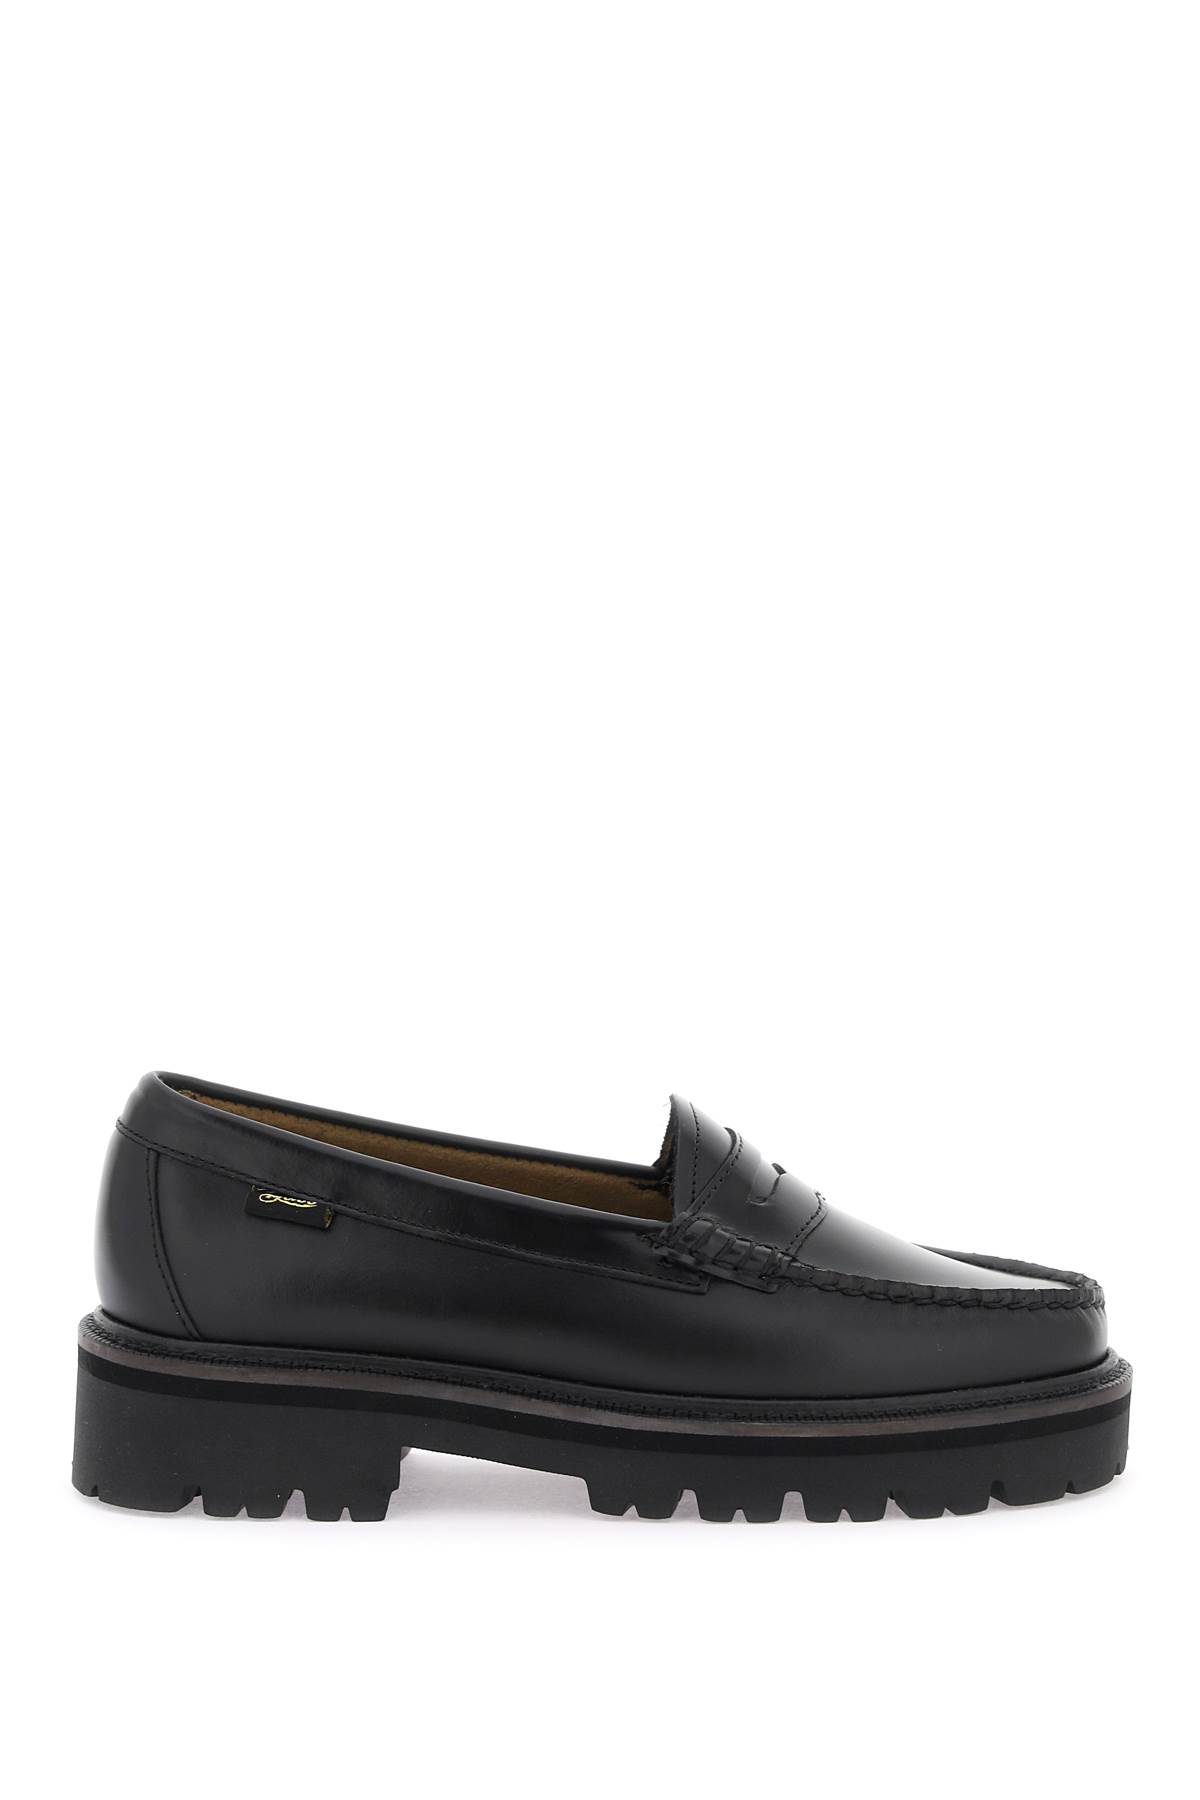 G.H.Bass & Co. Weejuns Super Lug Loafers